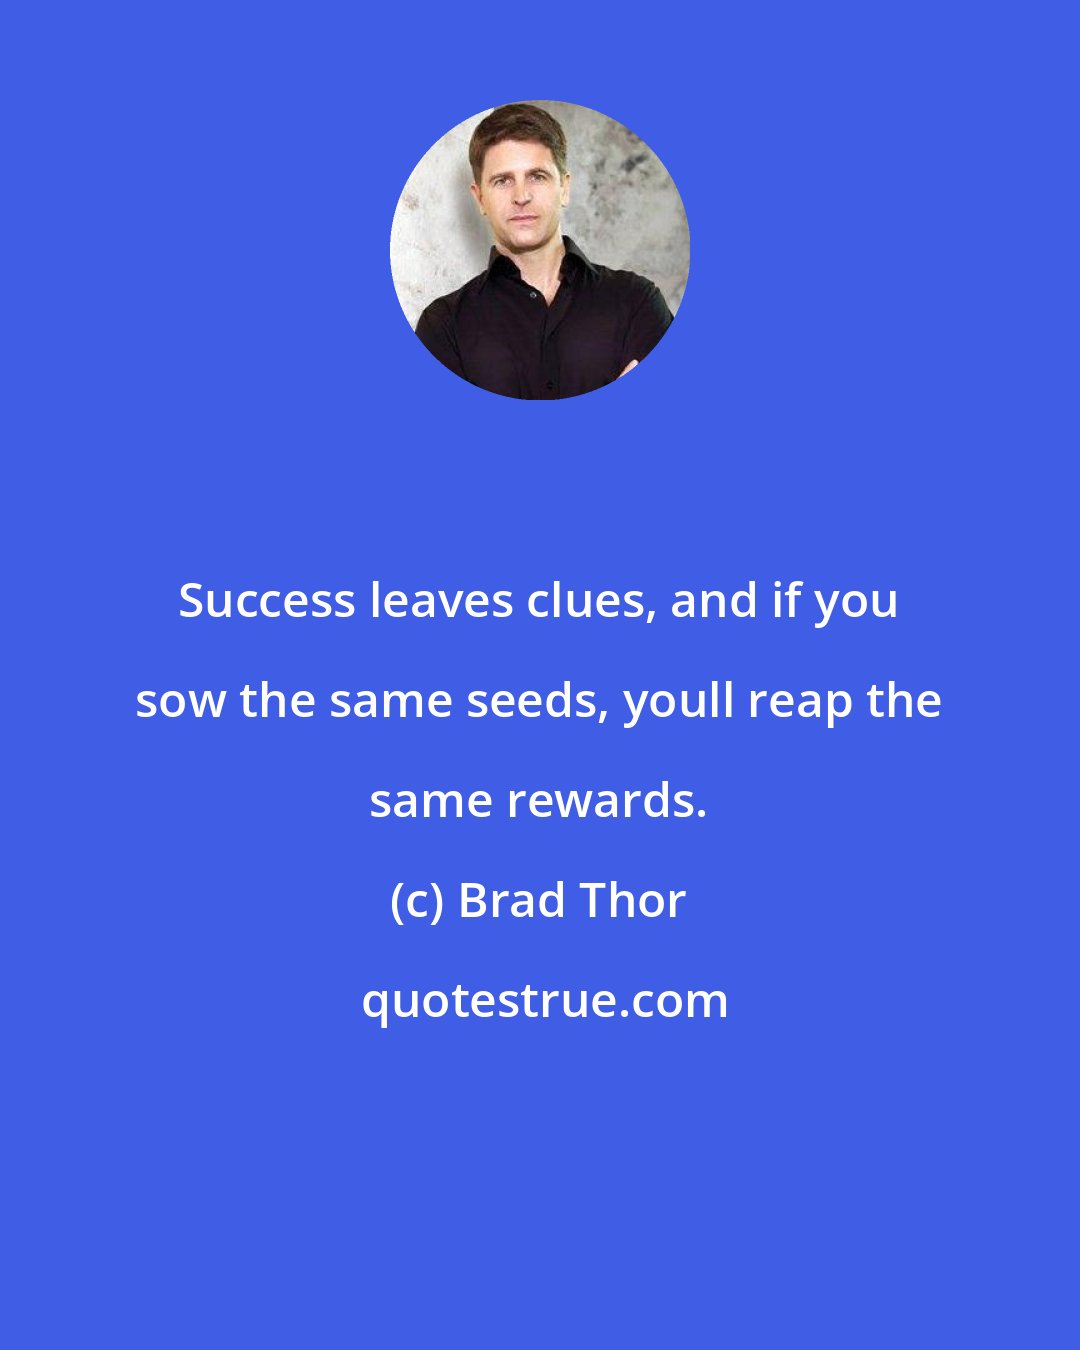 Brad Thor: Success leaves clues, and if you sow the same seeds, youll reap the same rewards.